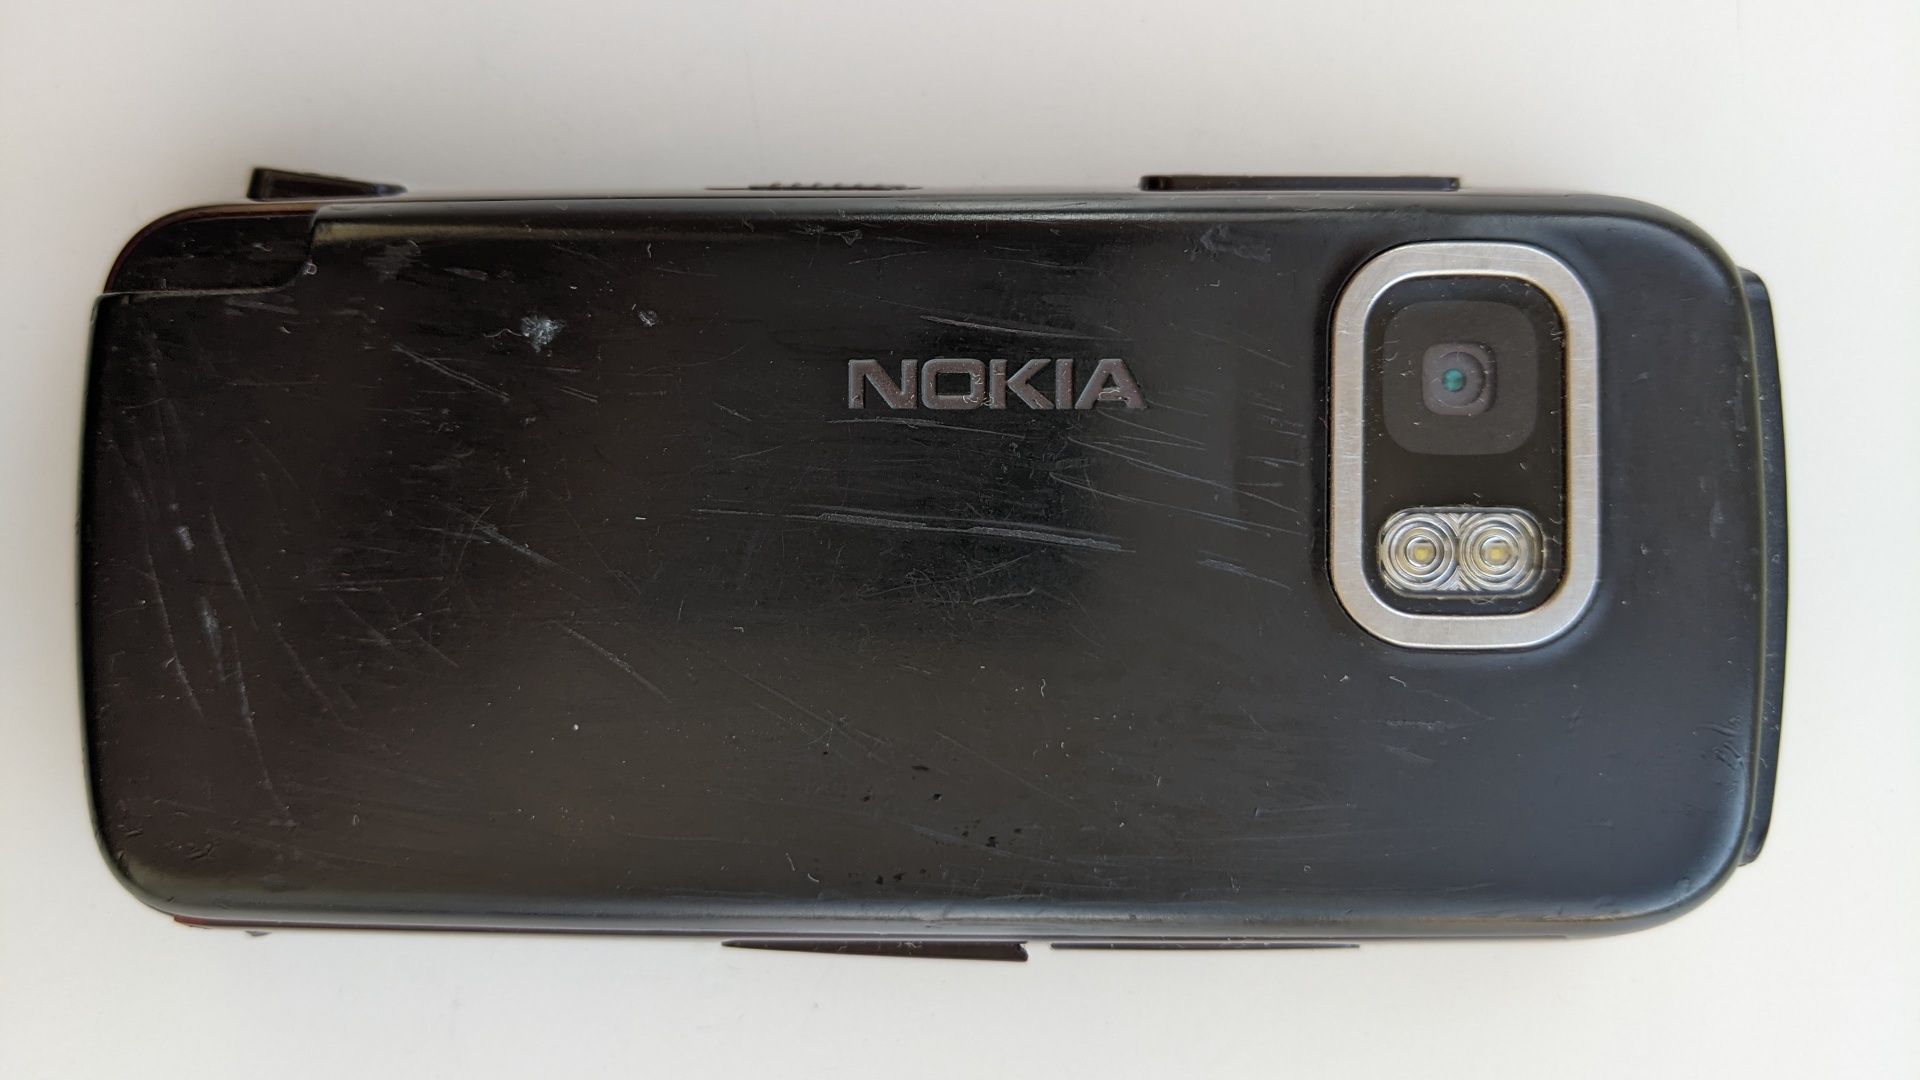 Nokia 5800d-1 made in Hungary